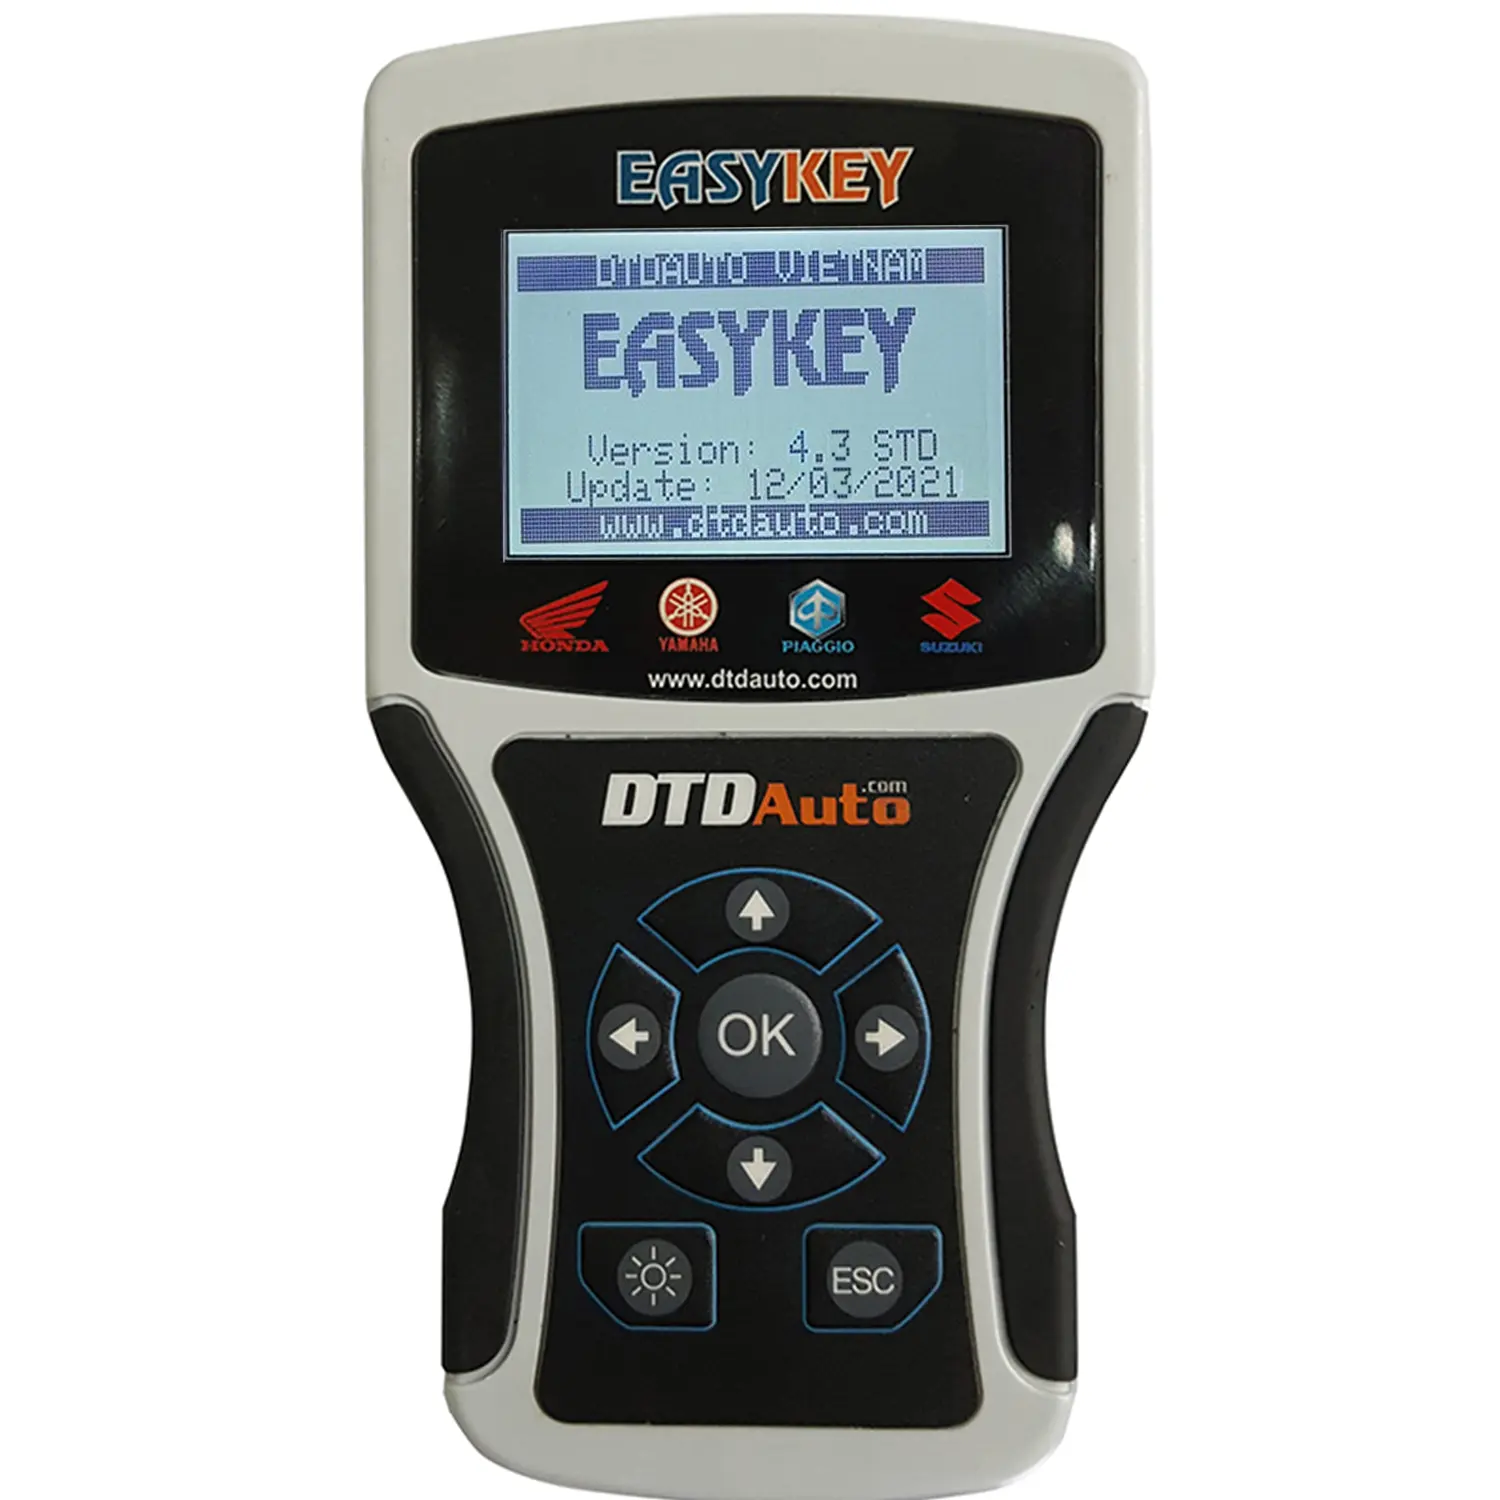 Version 5.0 Easykey Smart Key Programming Device Support remap OFF/ON SMART KEY function & Reading and writing KEYID, ECMID